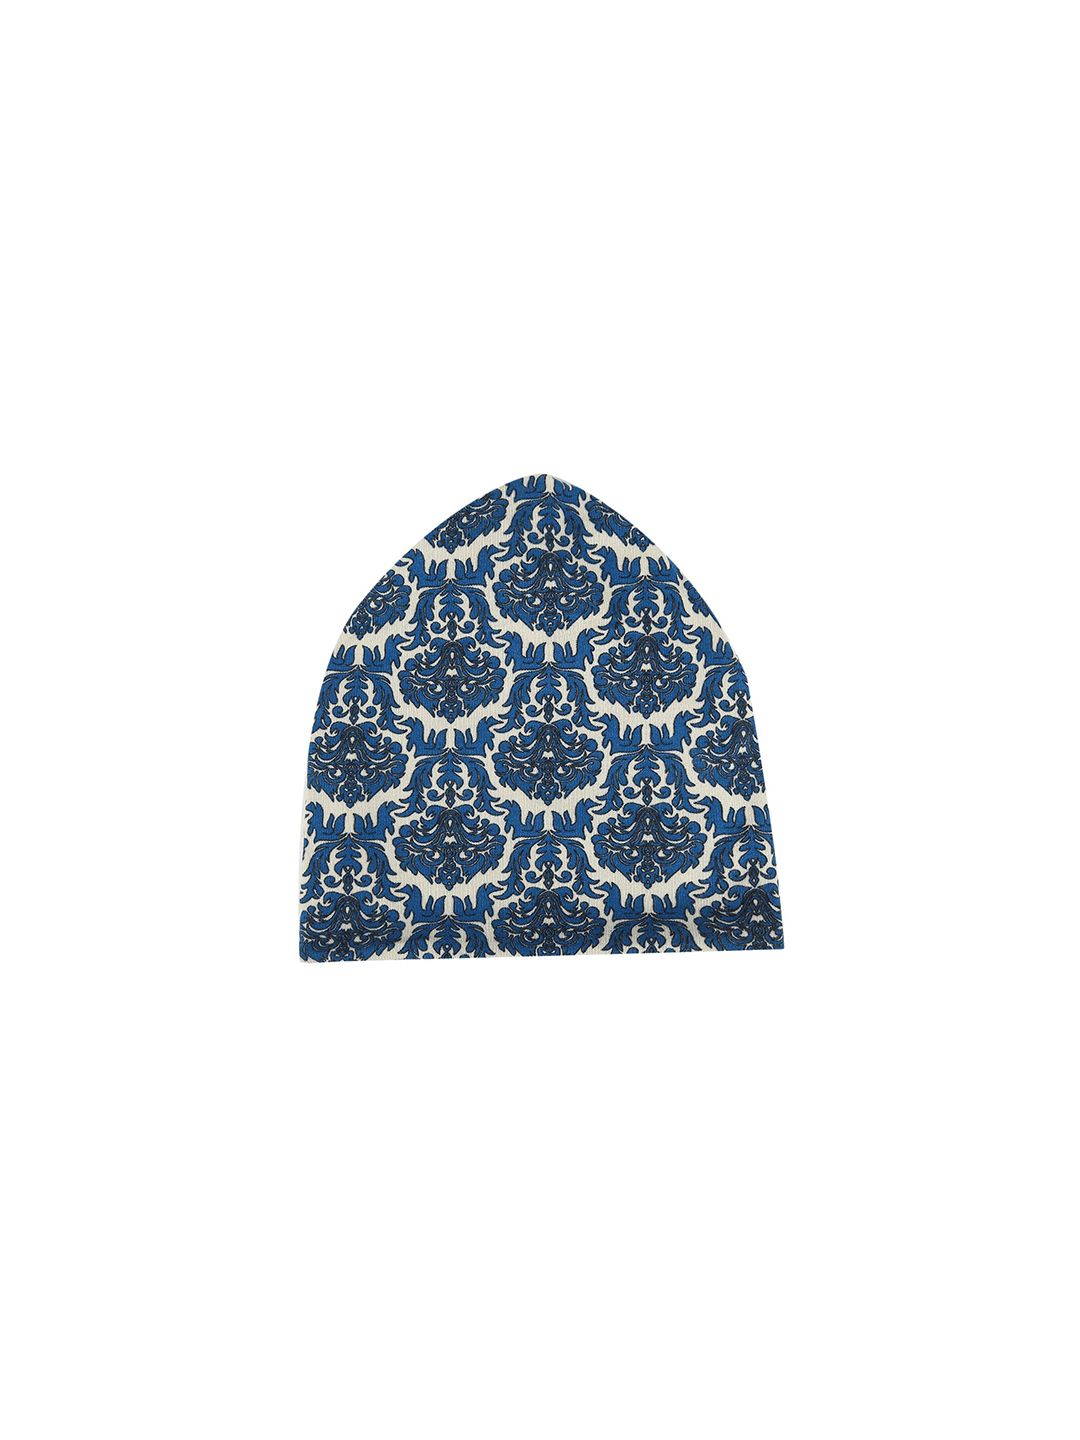 iSWEVEN Unisex Turquoise Blue & Cream-Coloured Printed Beanie Price in India